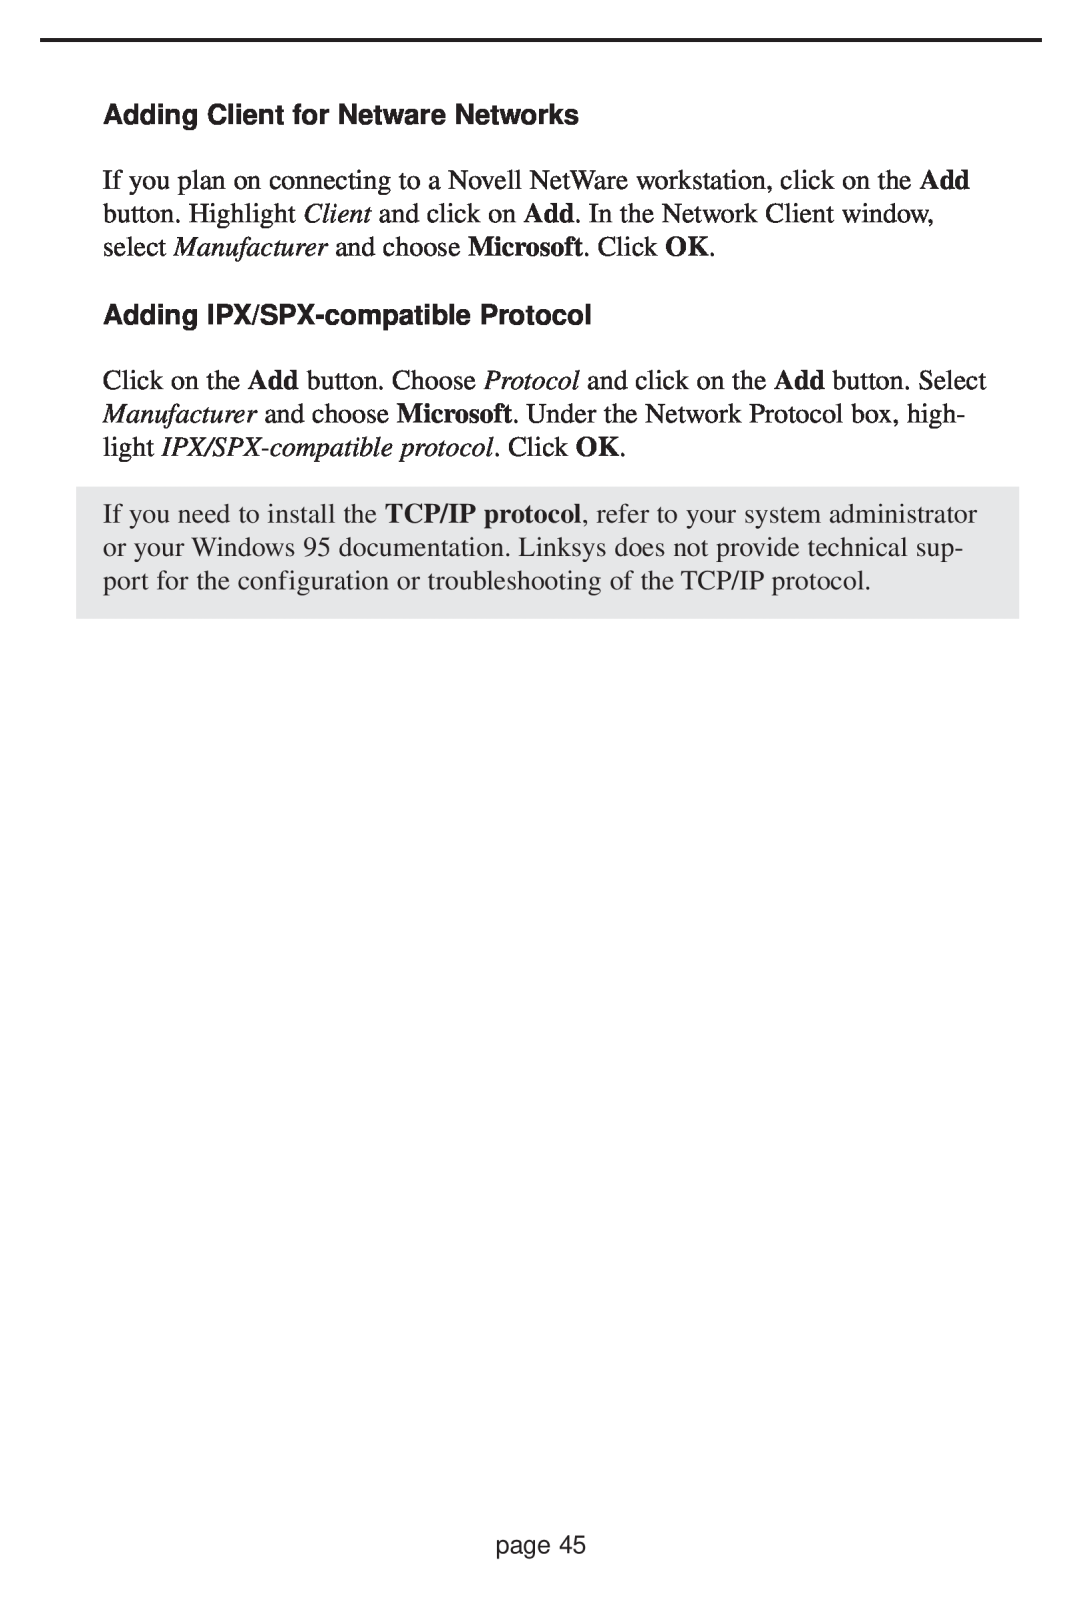 Linksys HPN100 manual Adding Client for Netware Networks, Adding IPX/SPX-compatible Protocol 